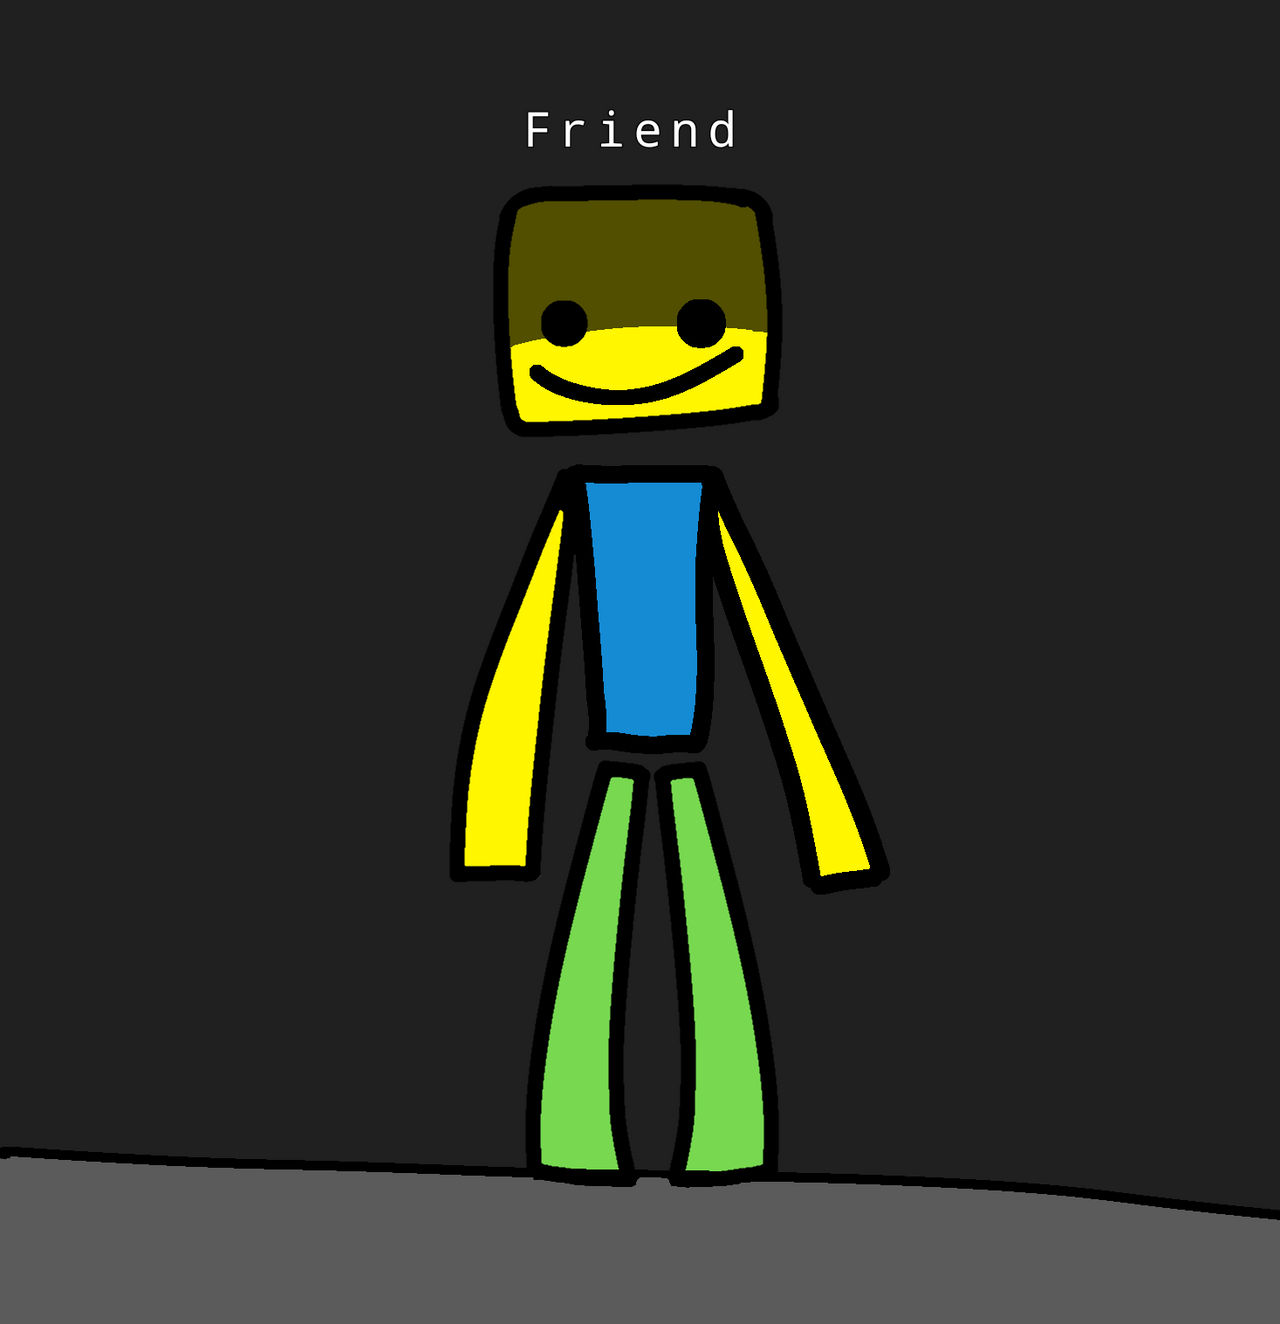 My Avatar in Roblox. by NoobsterRyousuke on DeviantArt